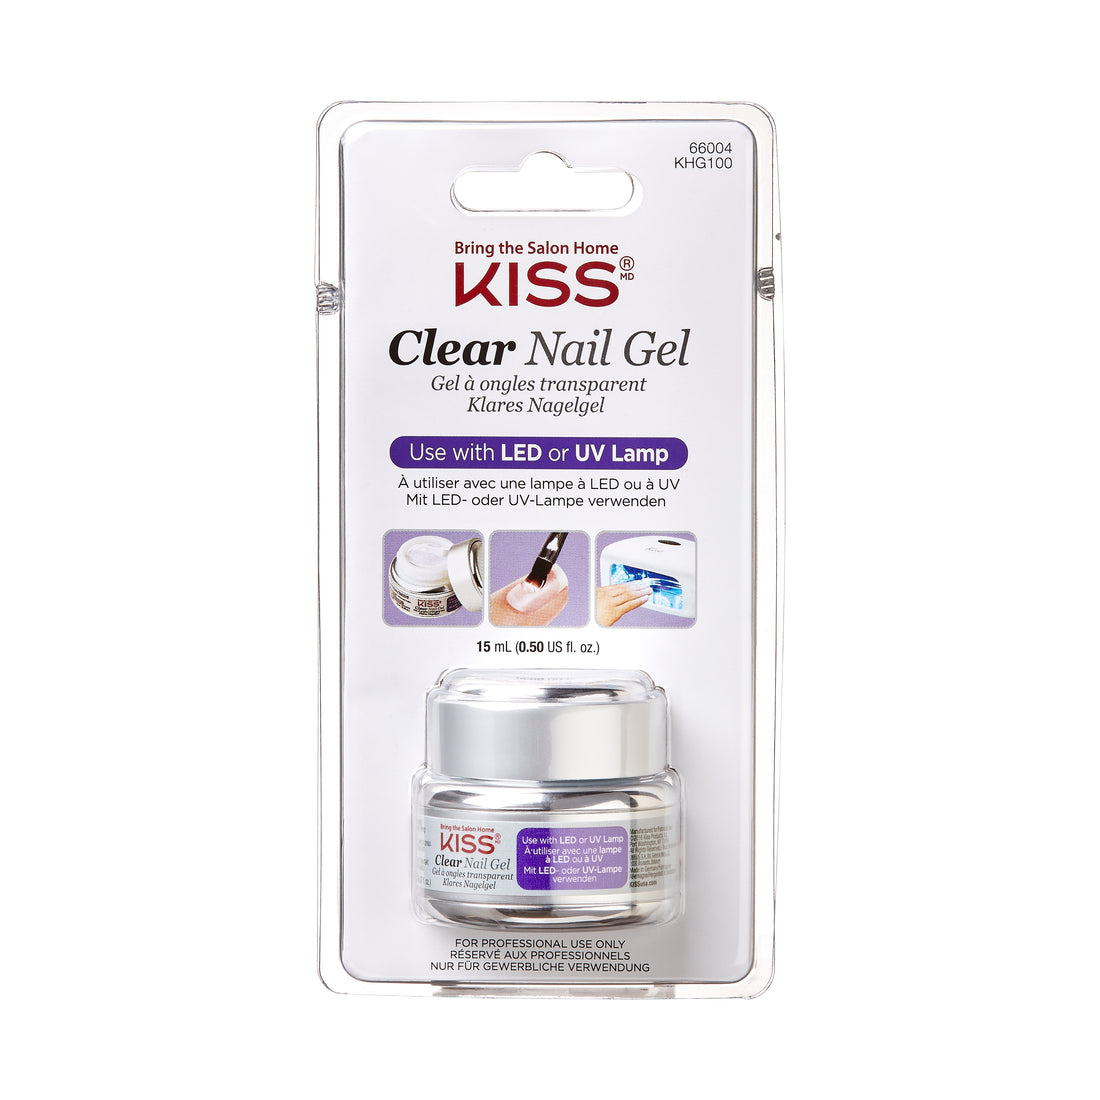 Clear Gel Nail - Use with LED or UV Lamp